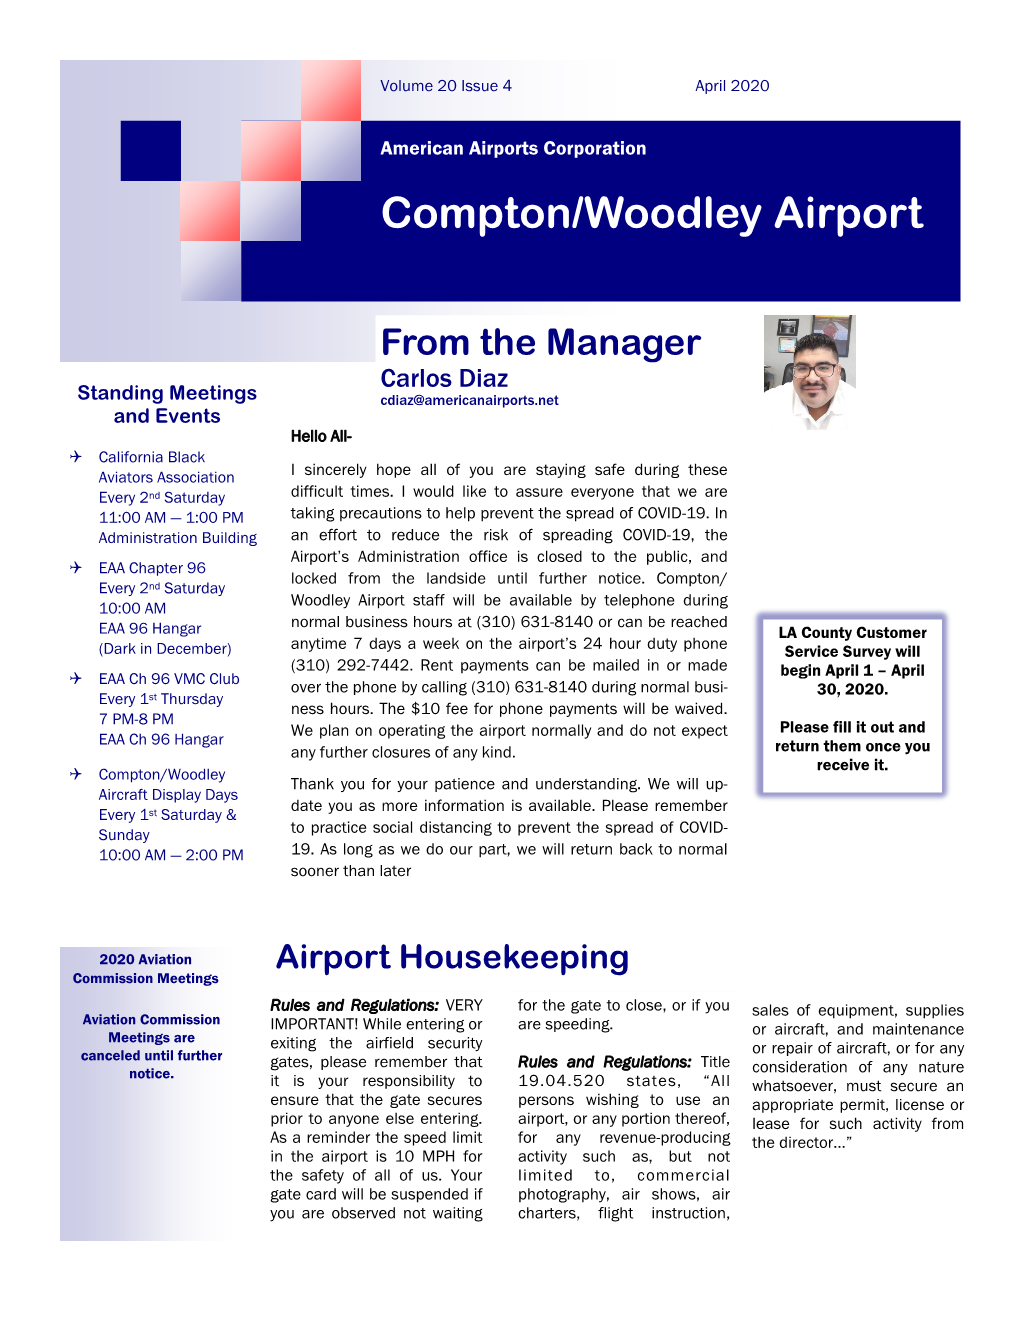 Compton/Woodley Airport April 2020 Newsletter